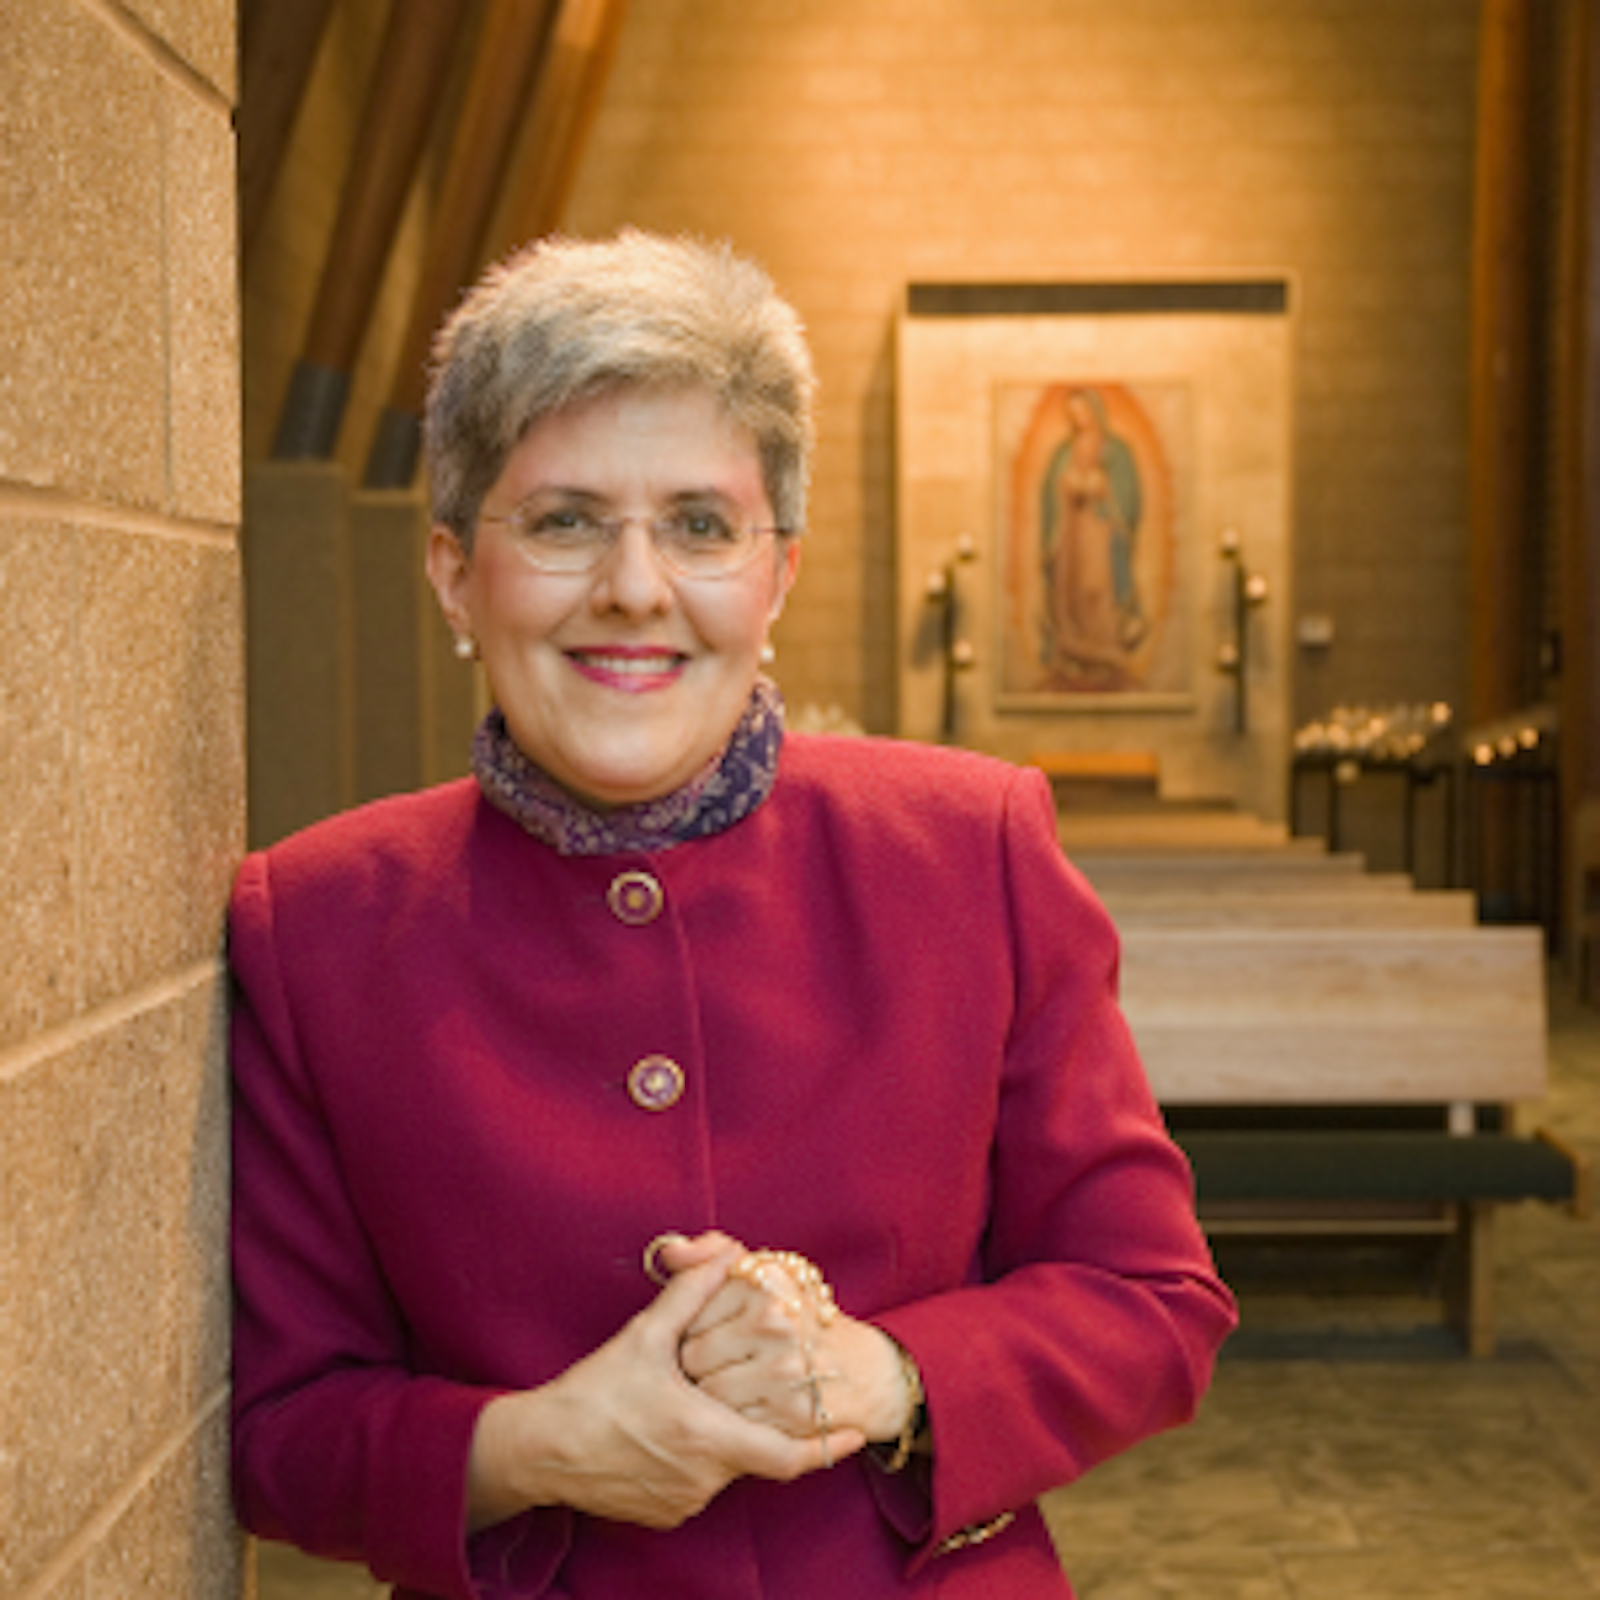 Known as "the purgatory lady," Susan Tassone will discuss the power of our prayers for those in purgatory, as well as their prayers in return. (Courtesy of Susan Tassone)